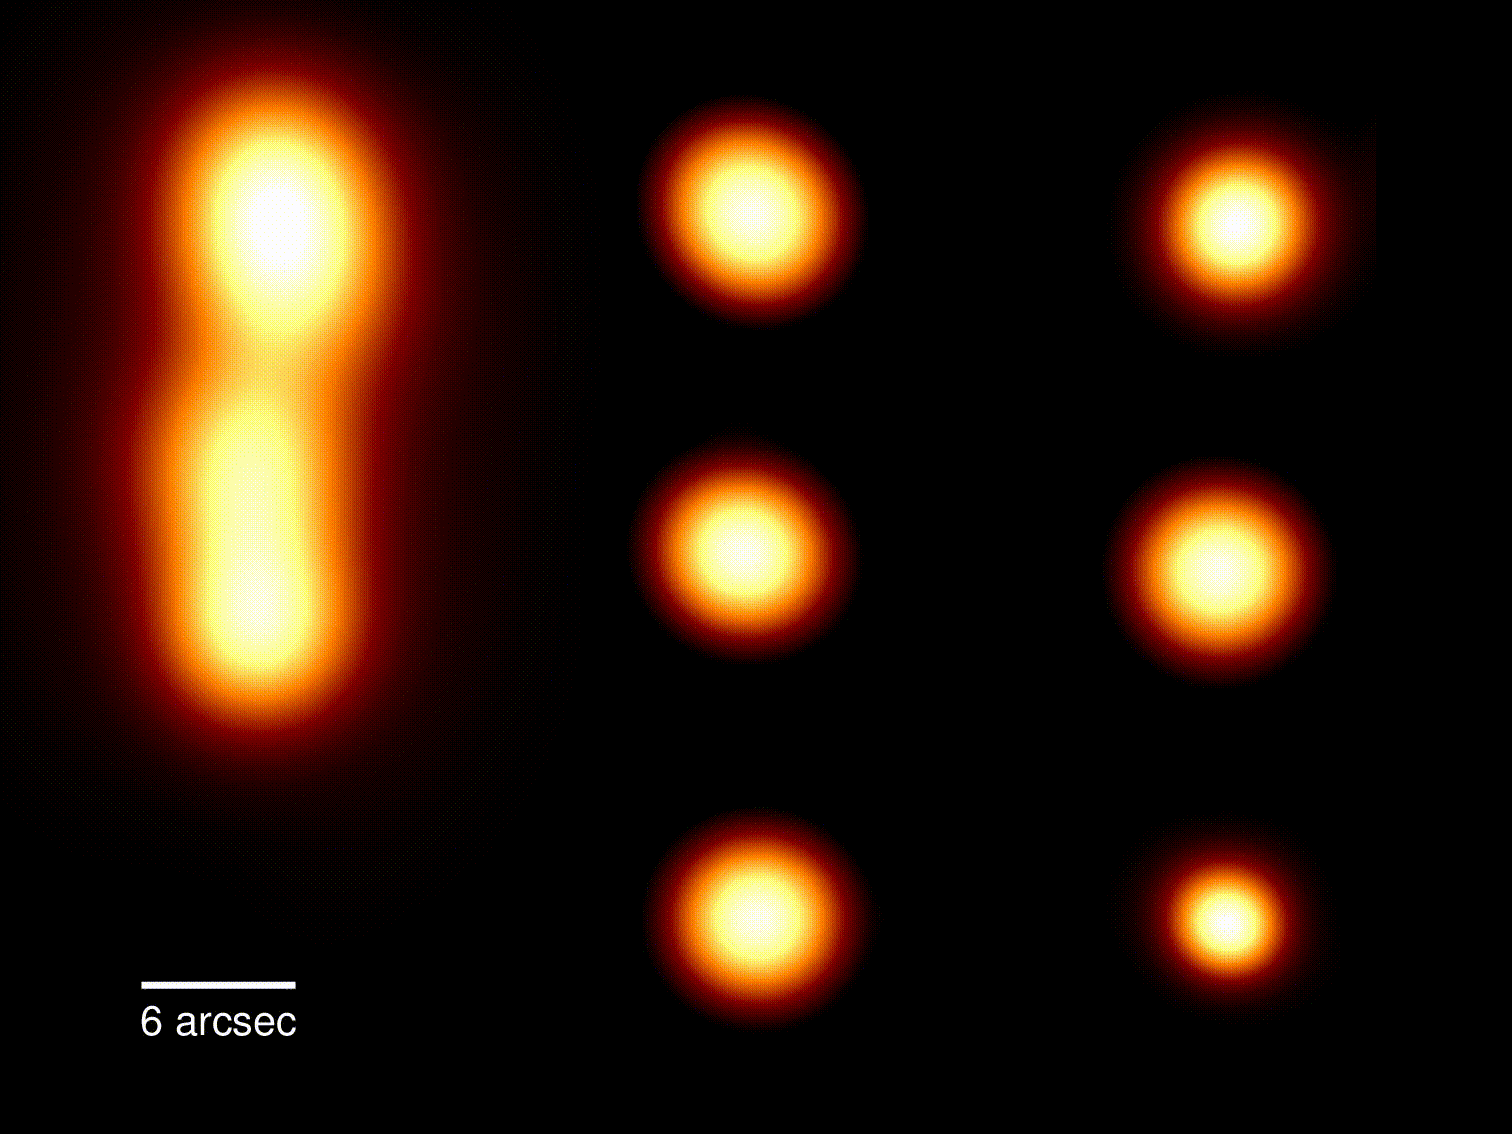 The GIF shows the difference between standard resolution images and the new high resolution images captured by the radio telescope LOFAR.